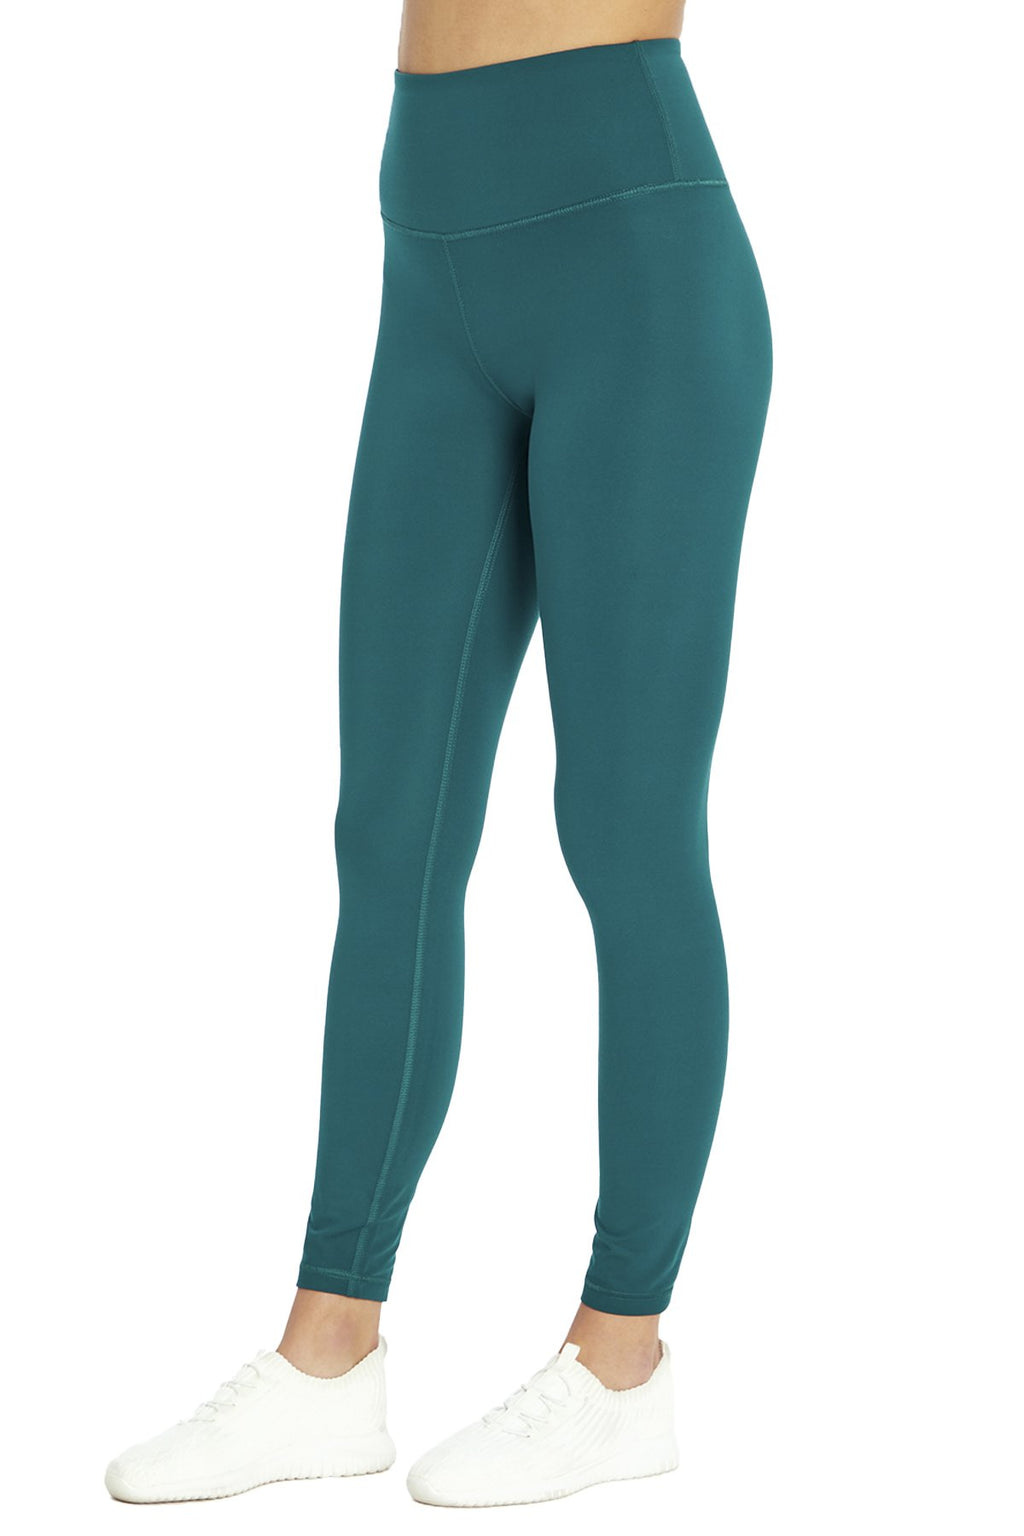 Zobha Stretch Active Pants, Tights & Leggings